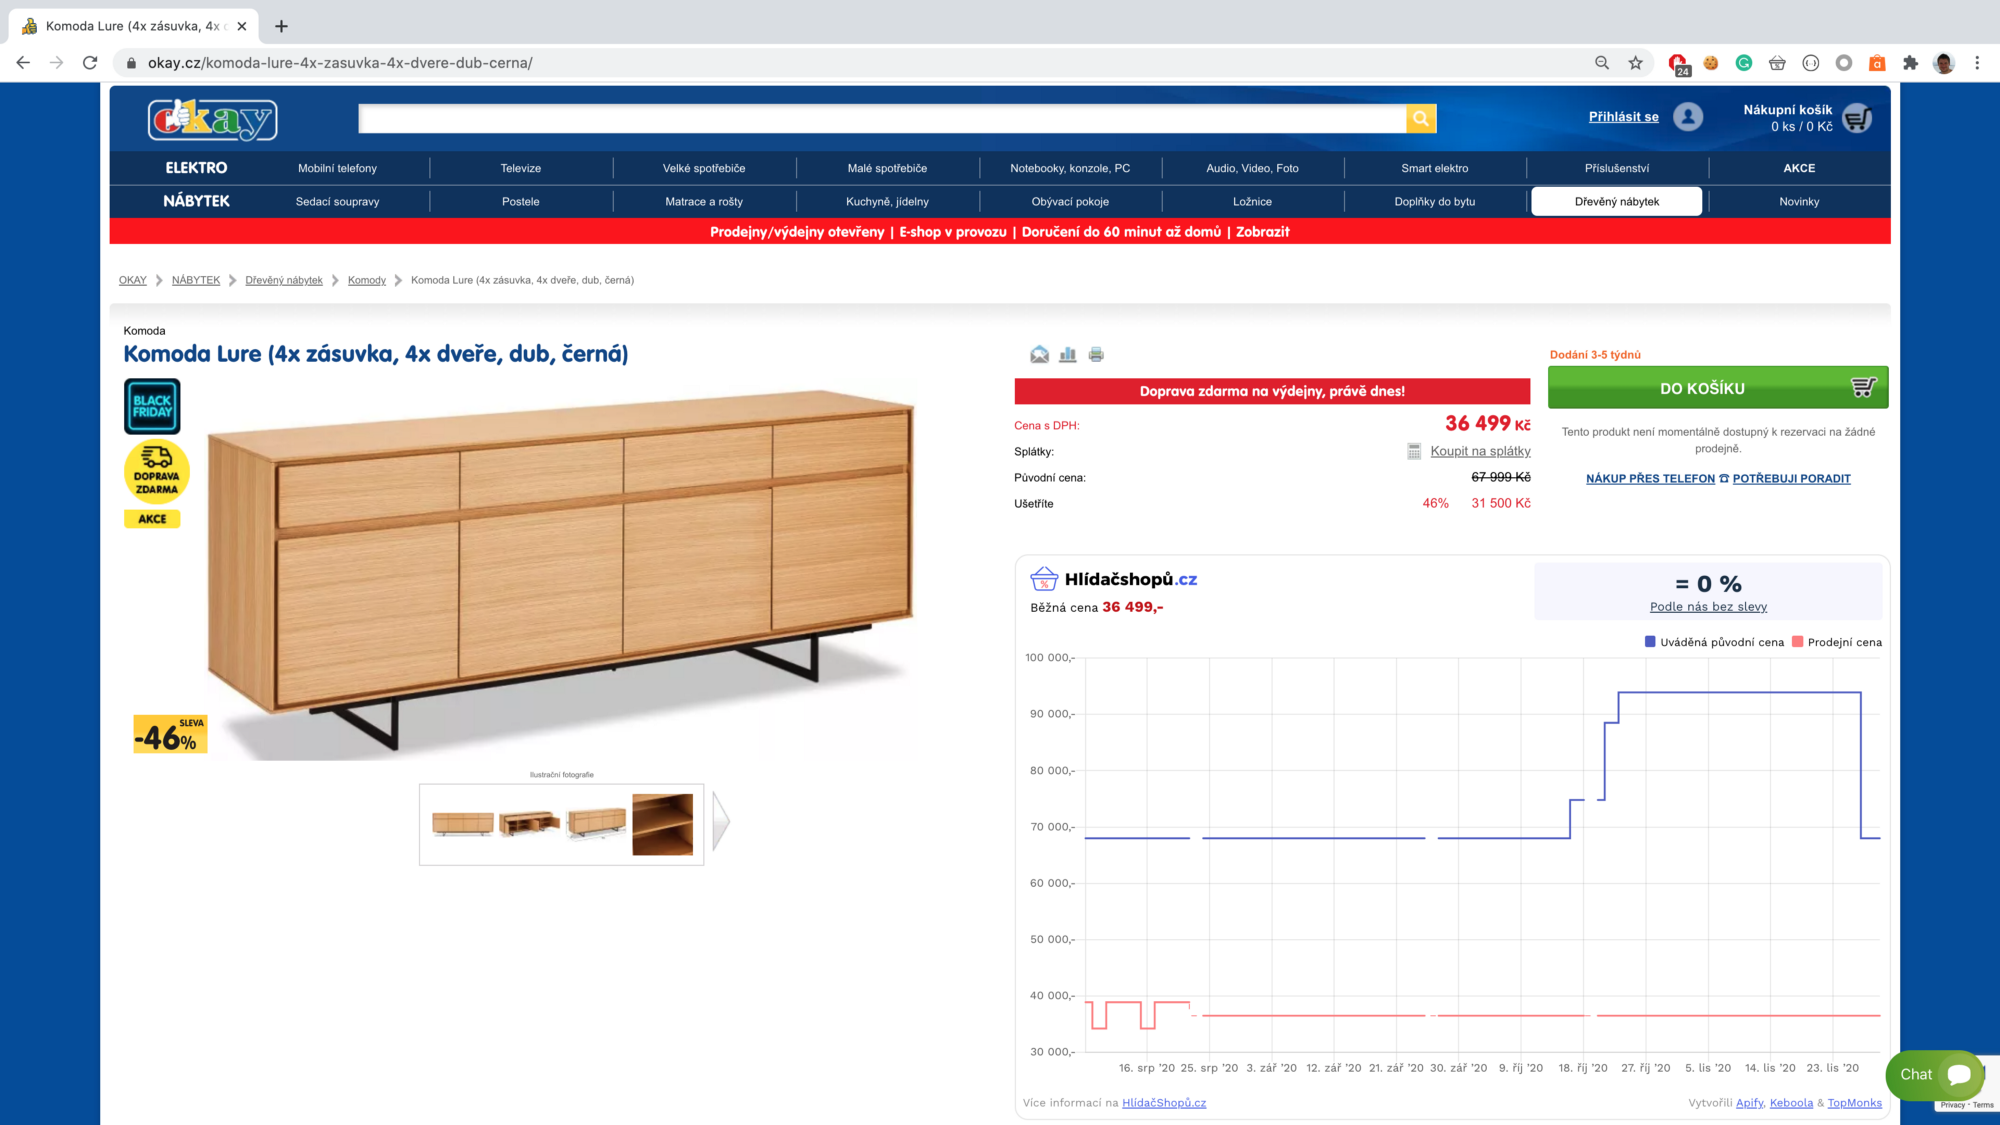 screenshot of a chest of drawers on sale at okay.cz from 67,999 CZK to 36,499 CZK